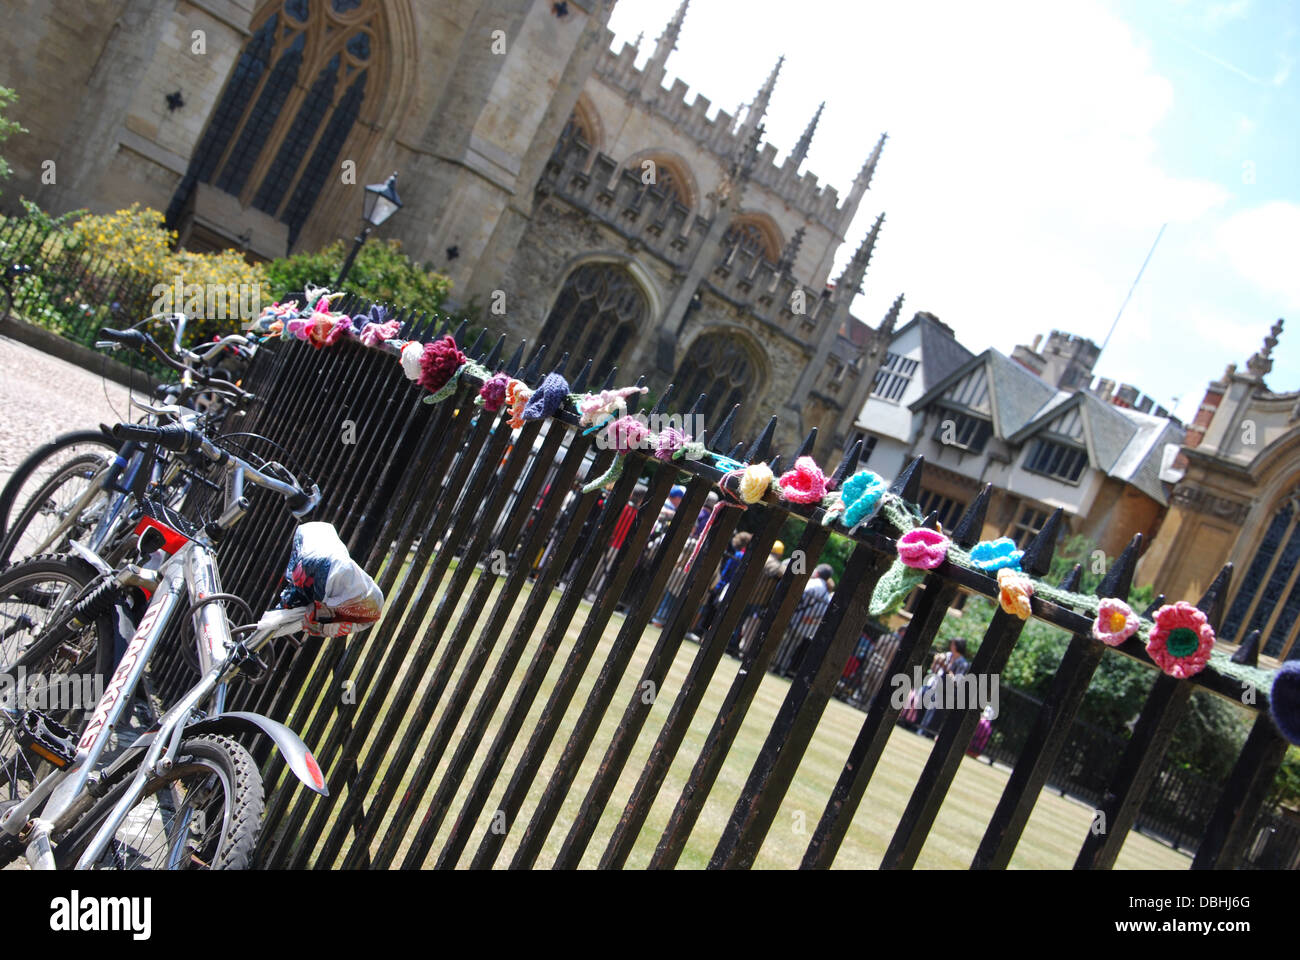 student bicycles and urban knitting at Radcliffe Square Oxford UK Stock Photo